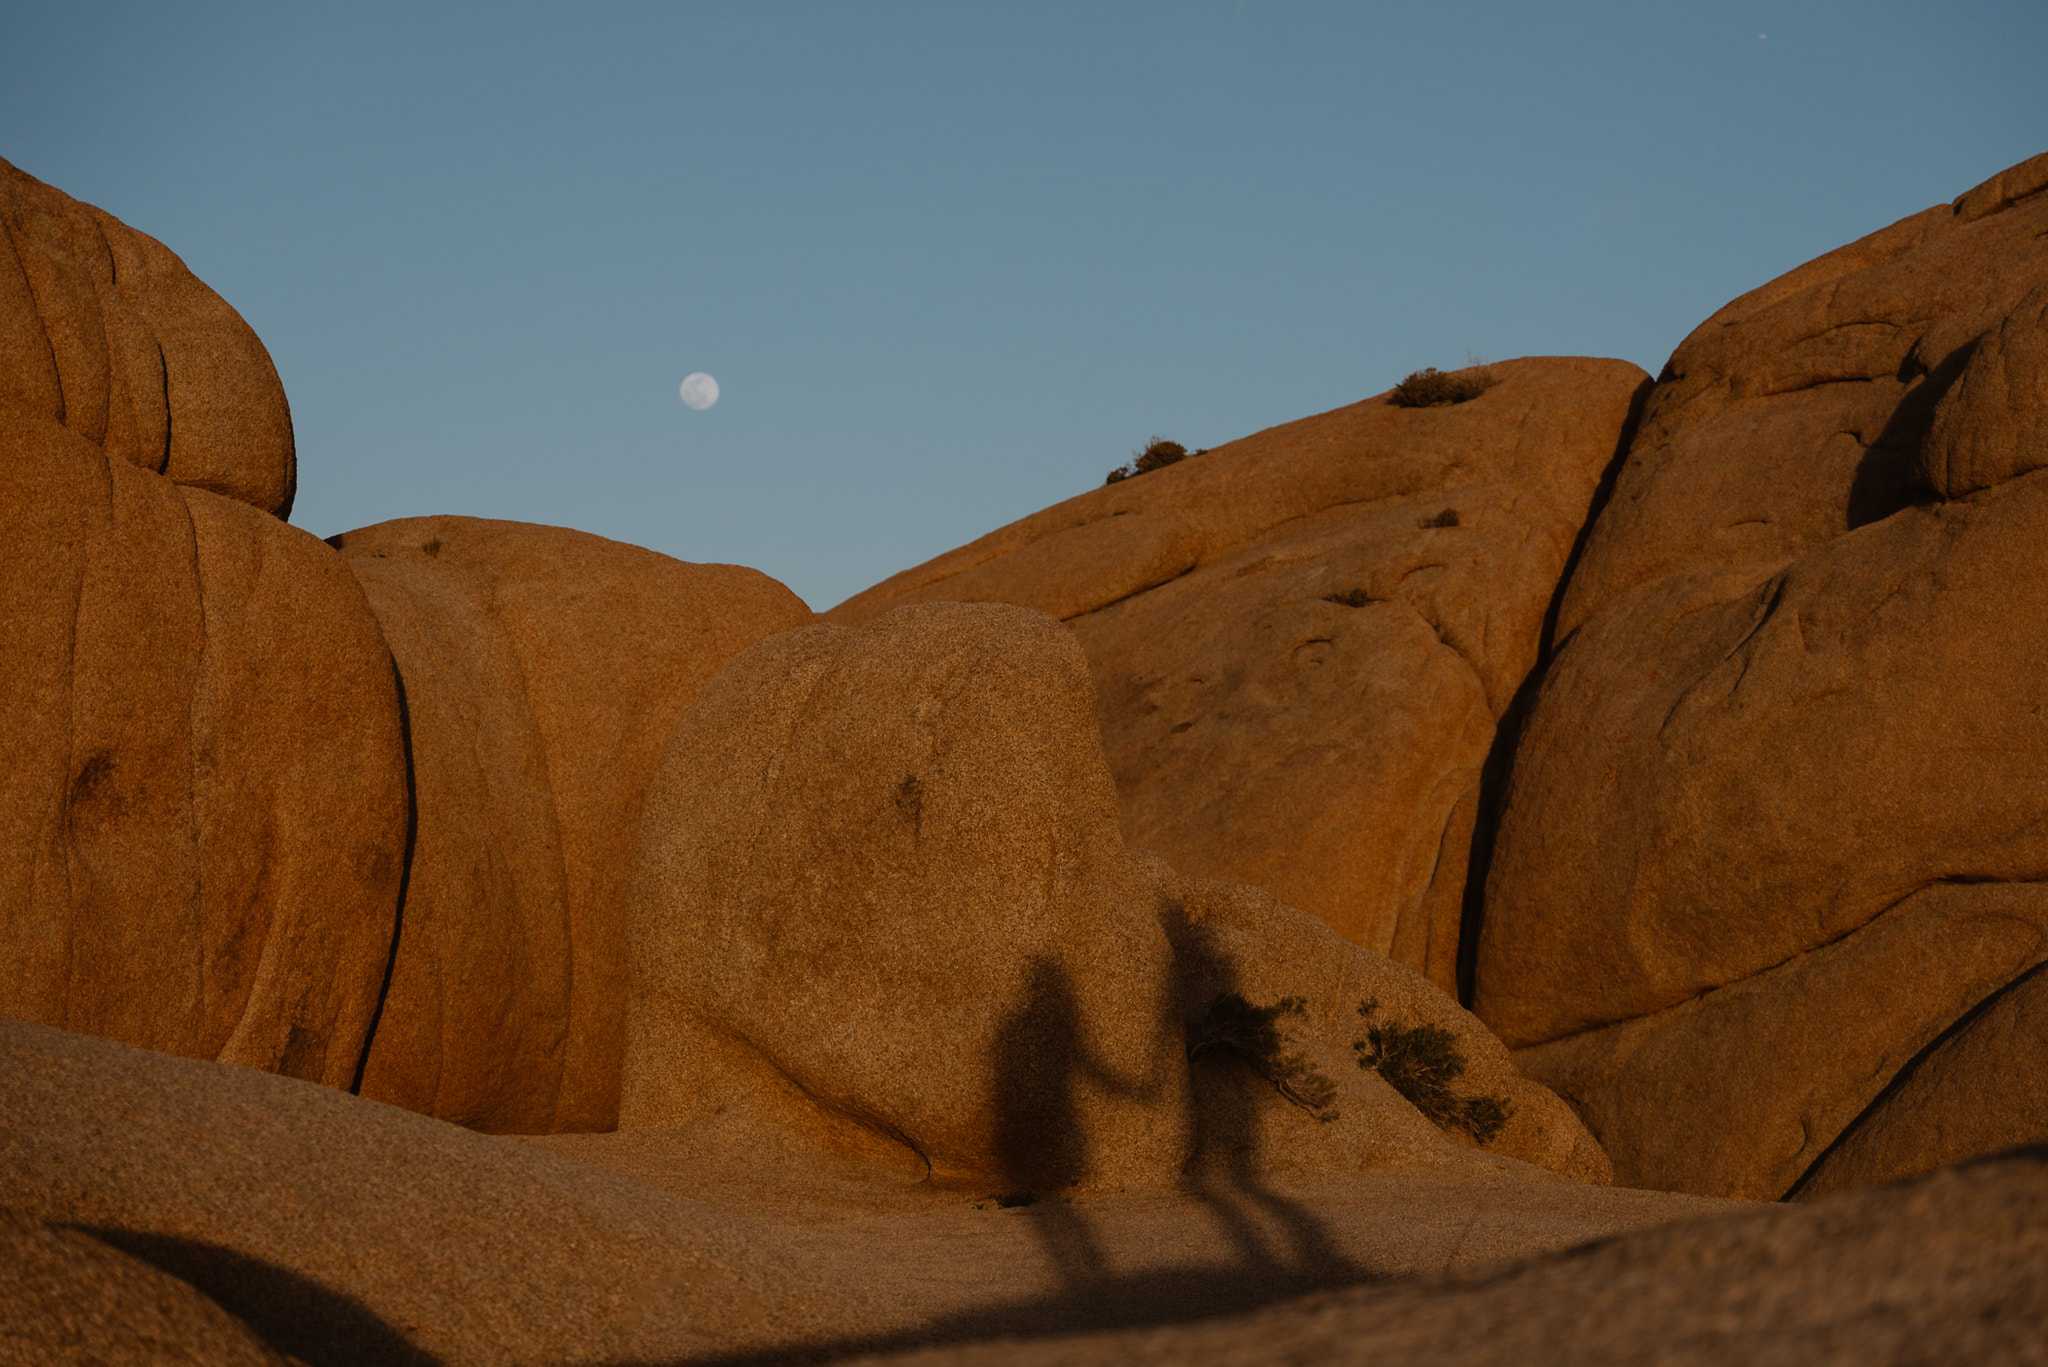 The shadow of a couple embracing is cast upon the smooth, weathered surface of jumbo rocks at dusk, with a clear sky and the moon rising in the background